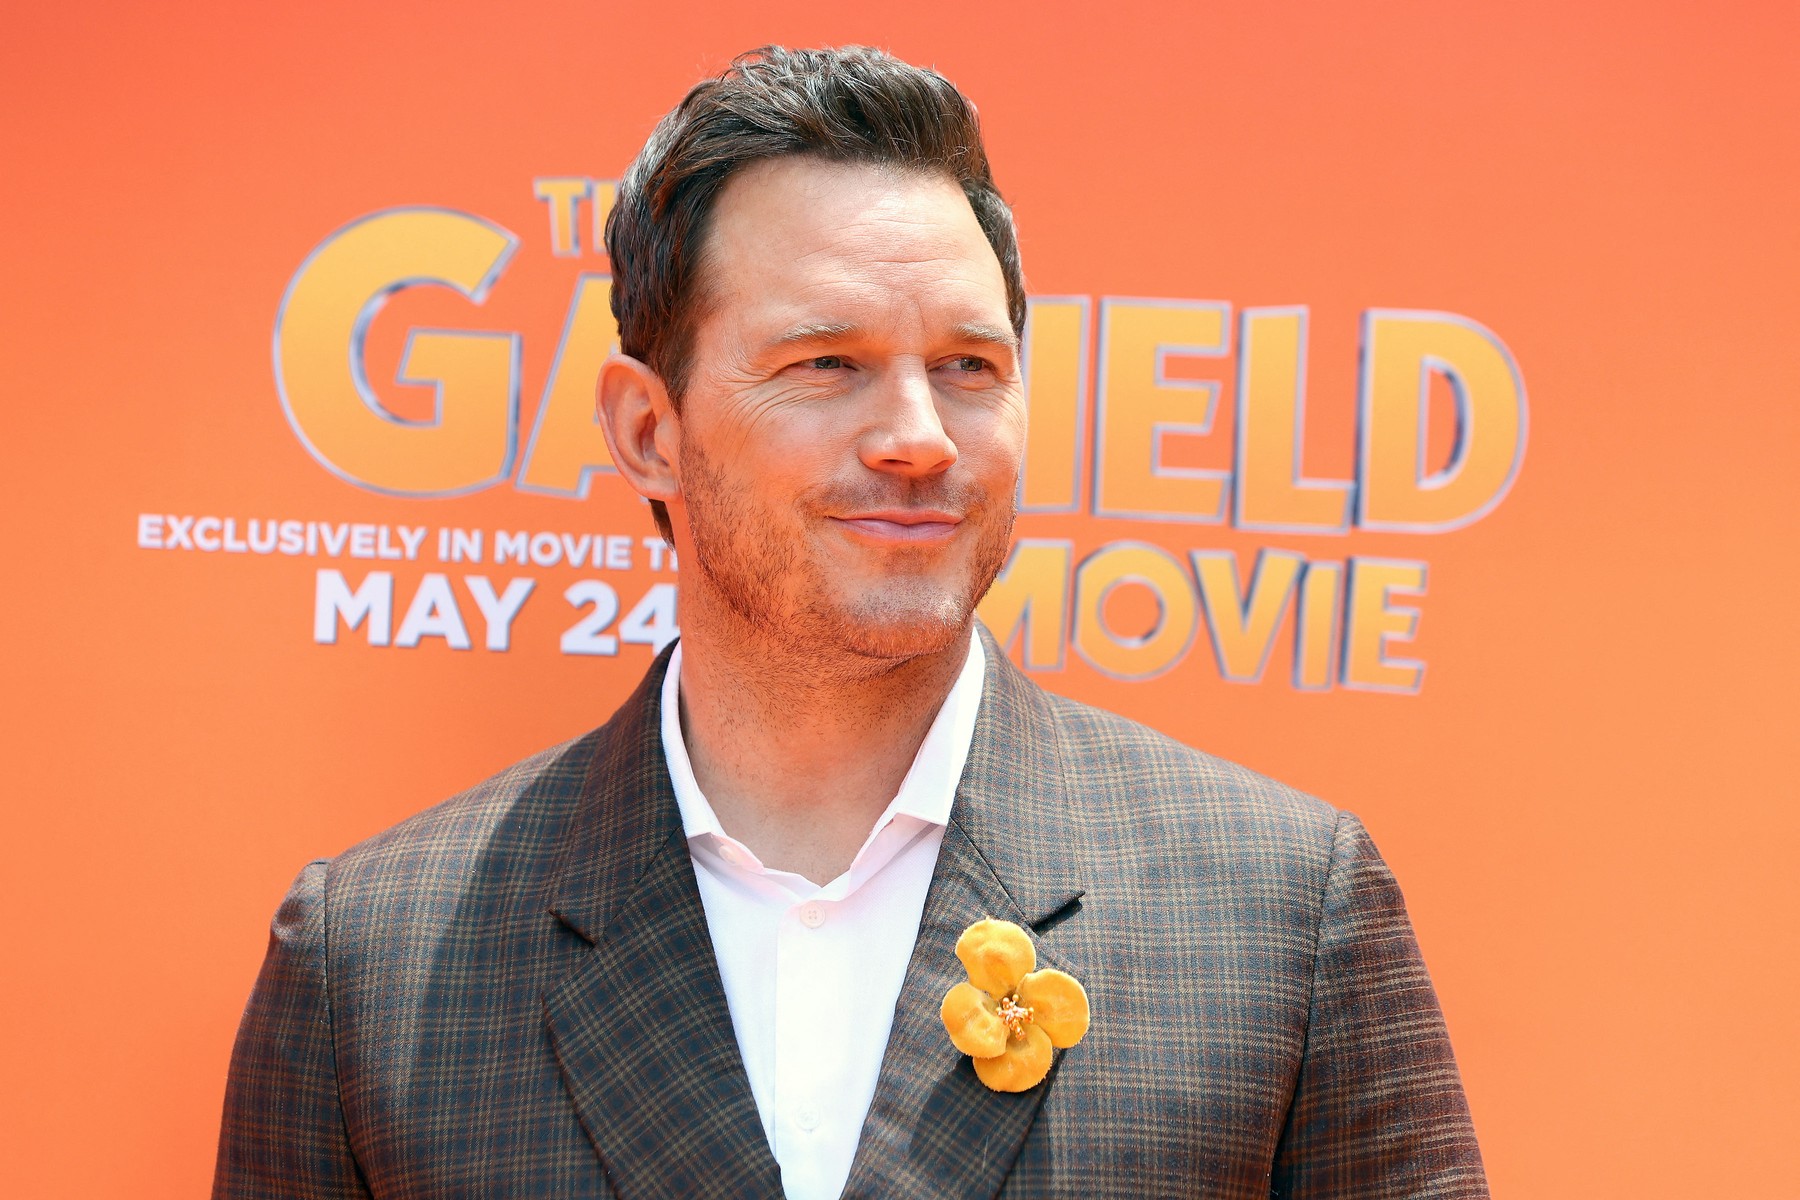 May 19, 2024, Los Angeles, California, USA: Scott Porter at the World Premiere of The Garfield Movie at the TCL Chinese Theatre IMAX.
19 May 2024
Pictured: May 19, 2024, Los Angeles, California, USA: Chris Pratt at the World Premiere of The Garfield Movie at the TCL Chinese Theatre IMAX.,Image: 875005063, License: Rights-managed, Restrictions: NO Argentina, Australia, Bolivia, Brazil, Chile, Colombia, Finland, France, Georgia, Hungary, Japan, Mexico, Netherlands, New Zealand, Poland, Romania, Russia, South Africa, Uruguay, Model Release: no, Credit line: ZUMAPRESS.com / MEGA / The Mega Agency / Profimedia